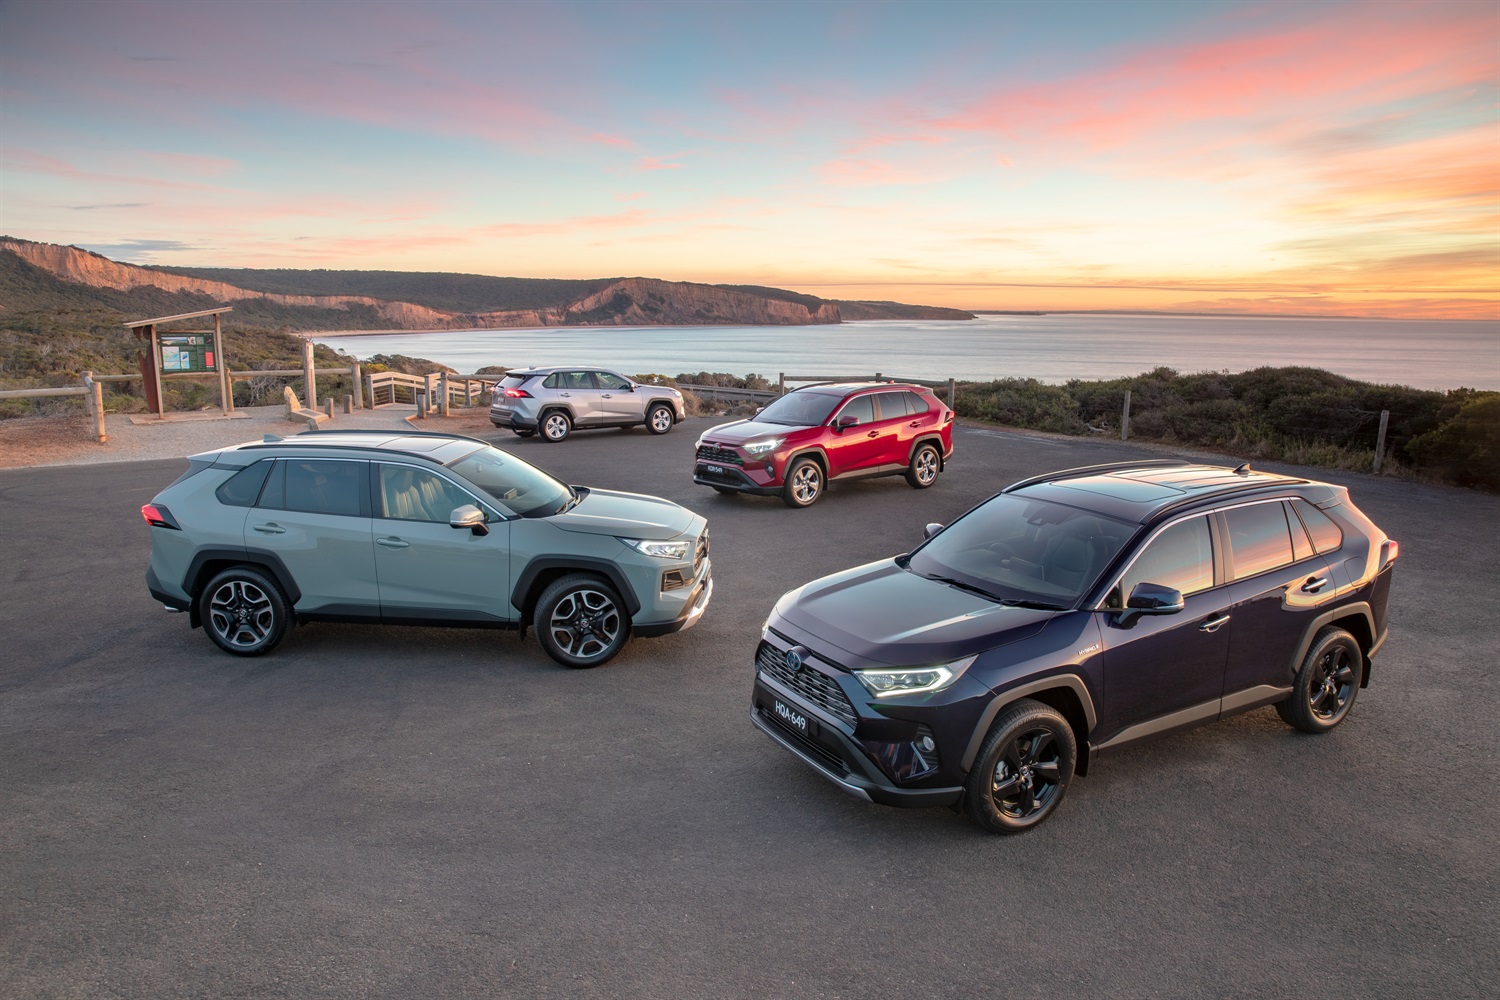 ALL-NEW RAV4 RAISES THE BAR FOR SUV STYLE AND SUBSTANCE